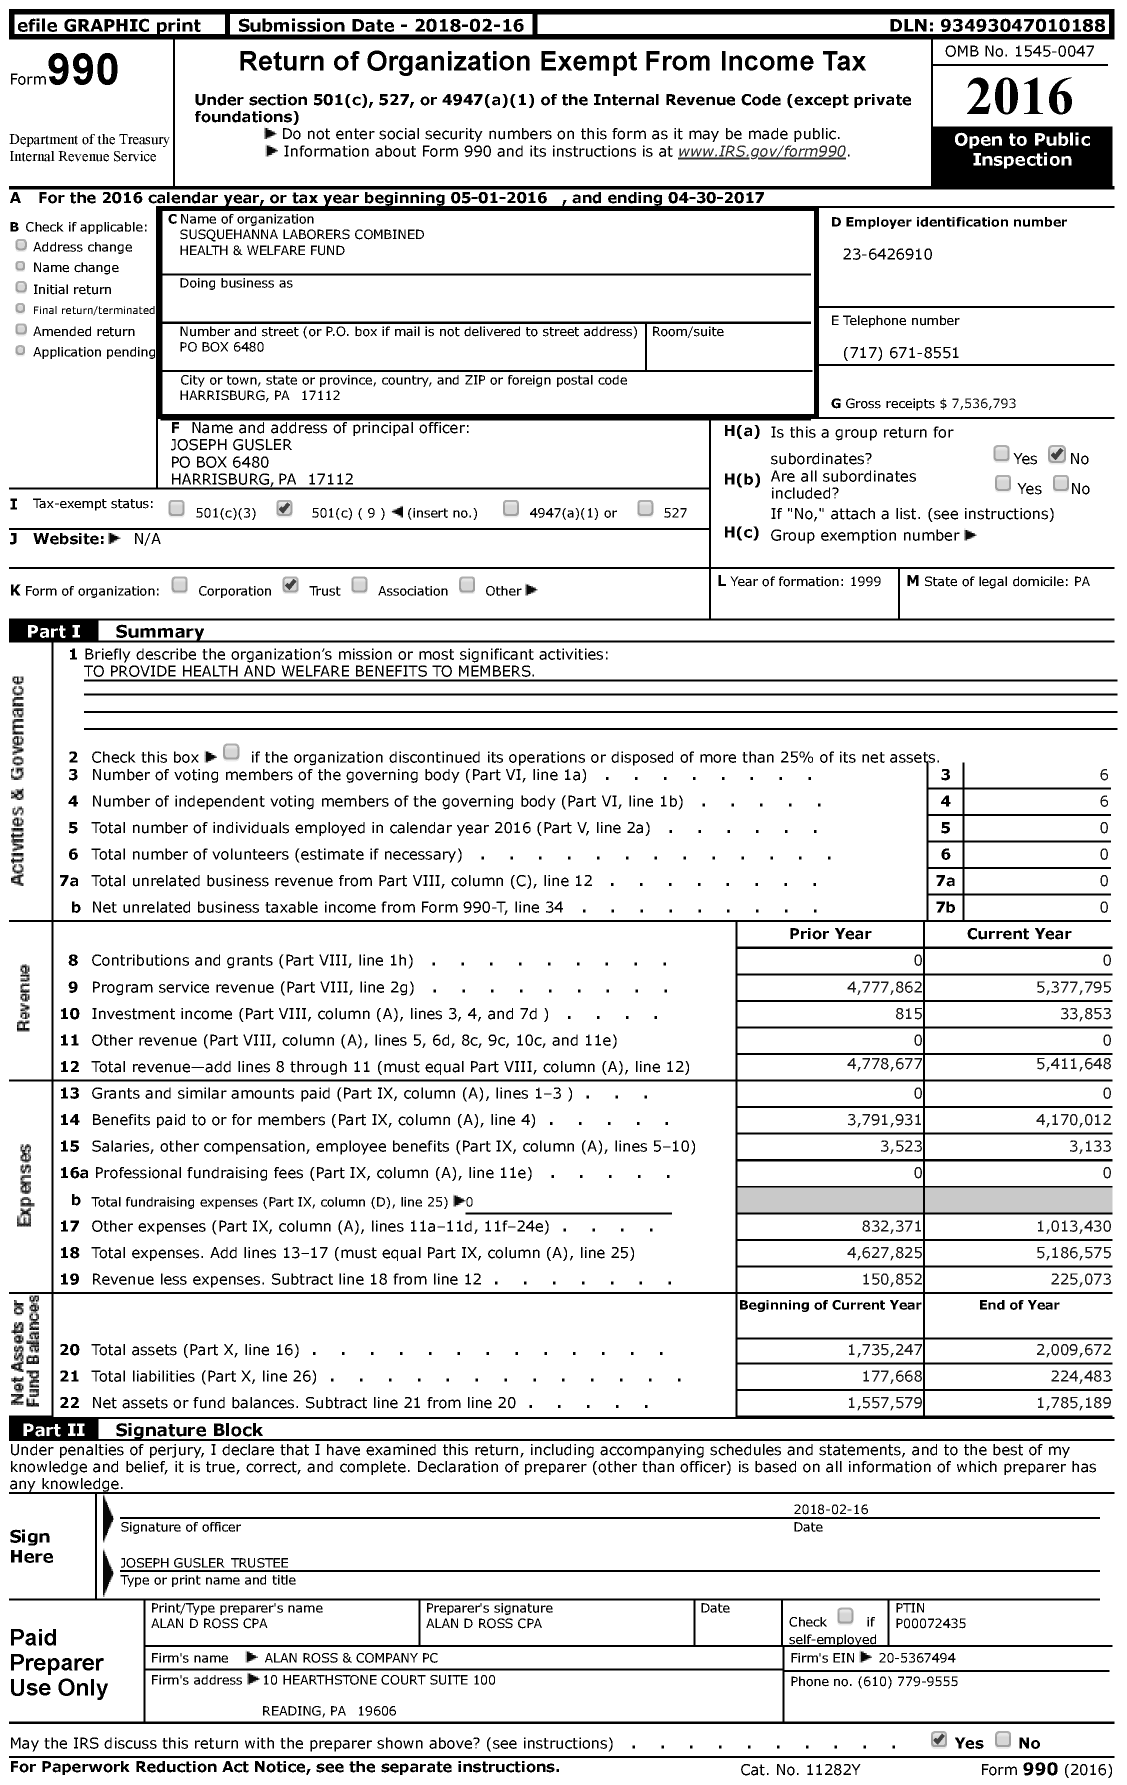 Image of first page of 2016 Form 990 for Susquehanna Laborers Combined Health and Welfare Fund